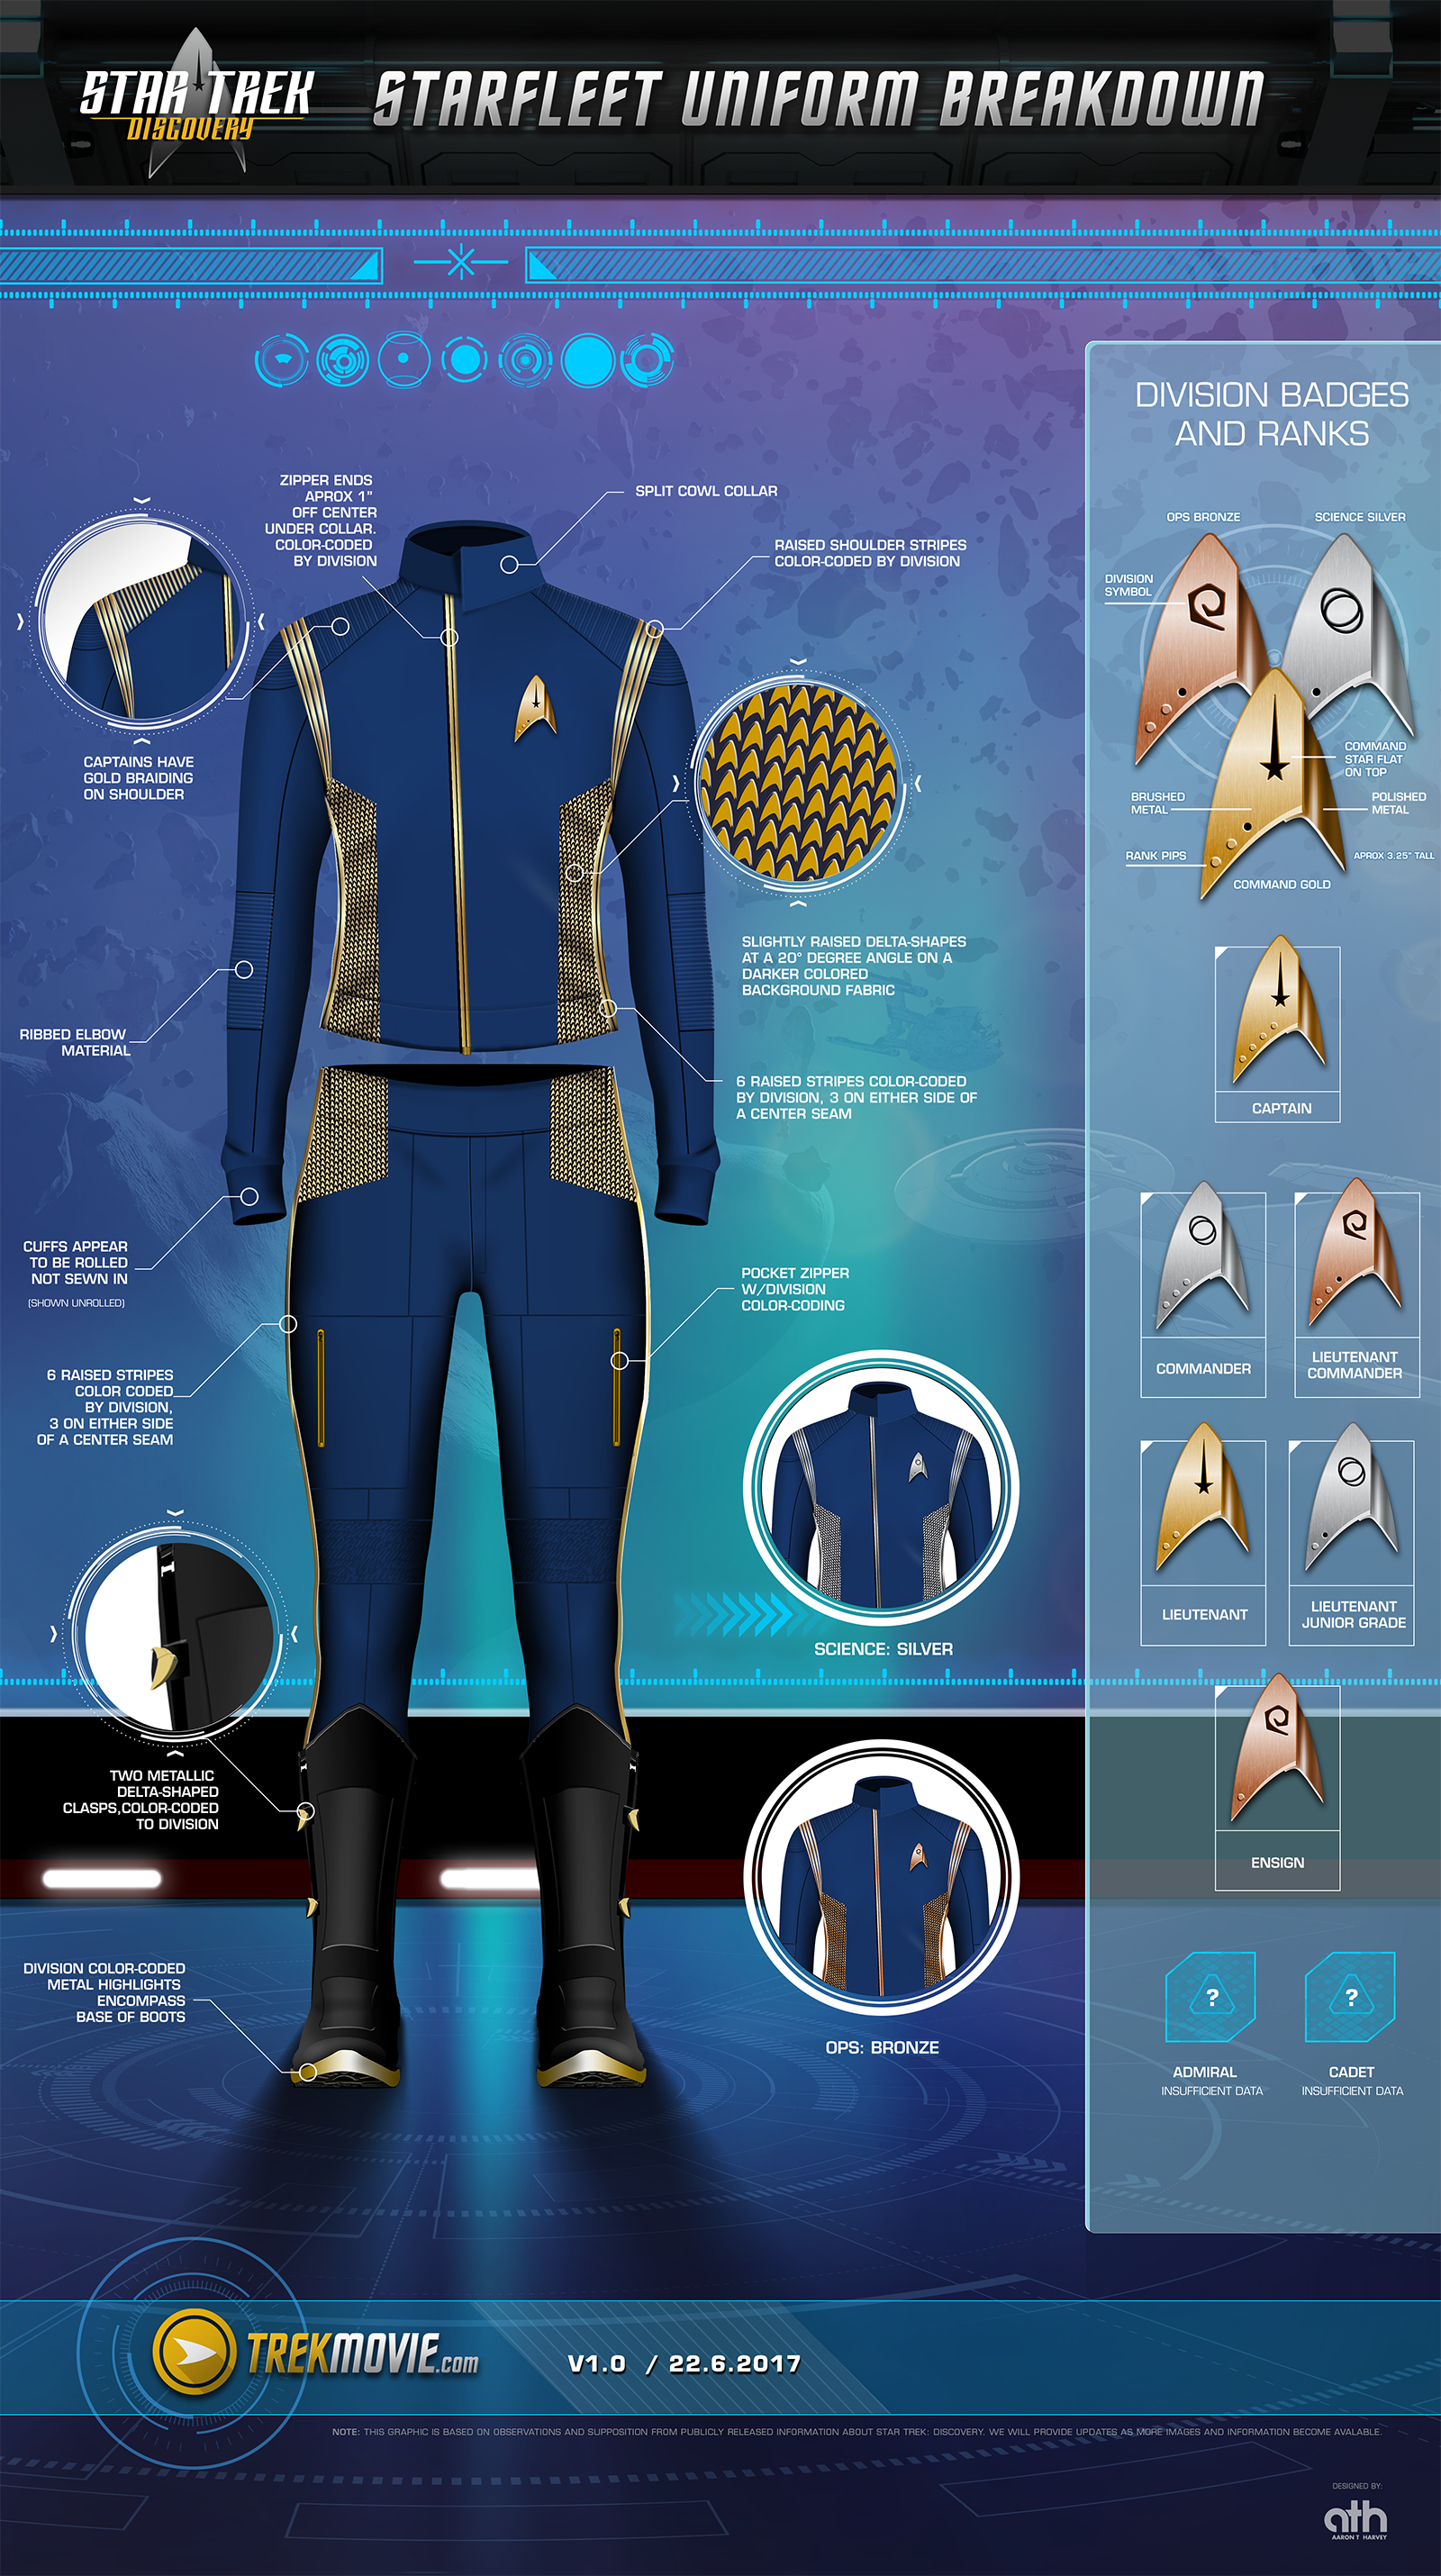 A Close-Up Look At ‘Star Trek: Discovery’ Uniforms [INFOGRAPHIC] from https://trekmovie.com/2017/06/22/a-close-up-look-at-star-trek-discovery-uniforms-infographic/